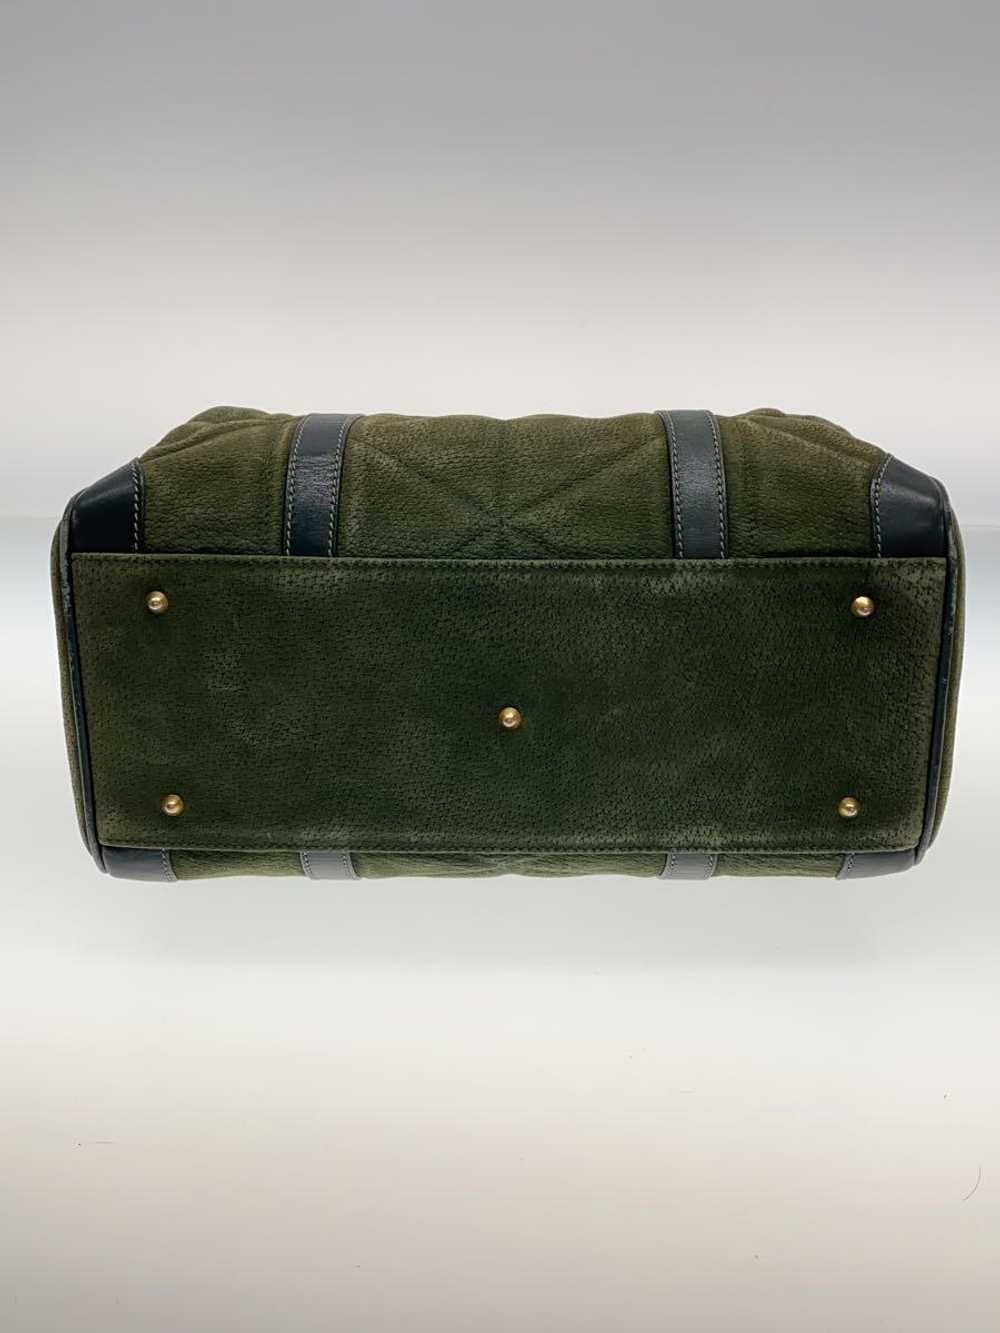 Used Gucci Boston Bag/Suede/Grn Bag - image 4